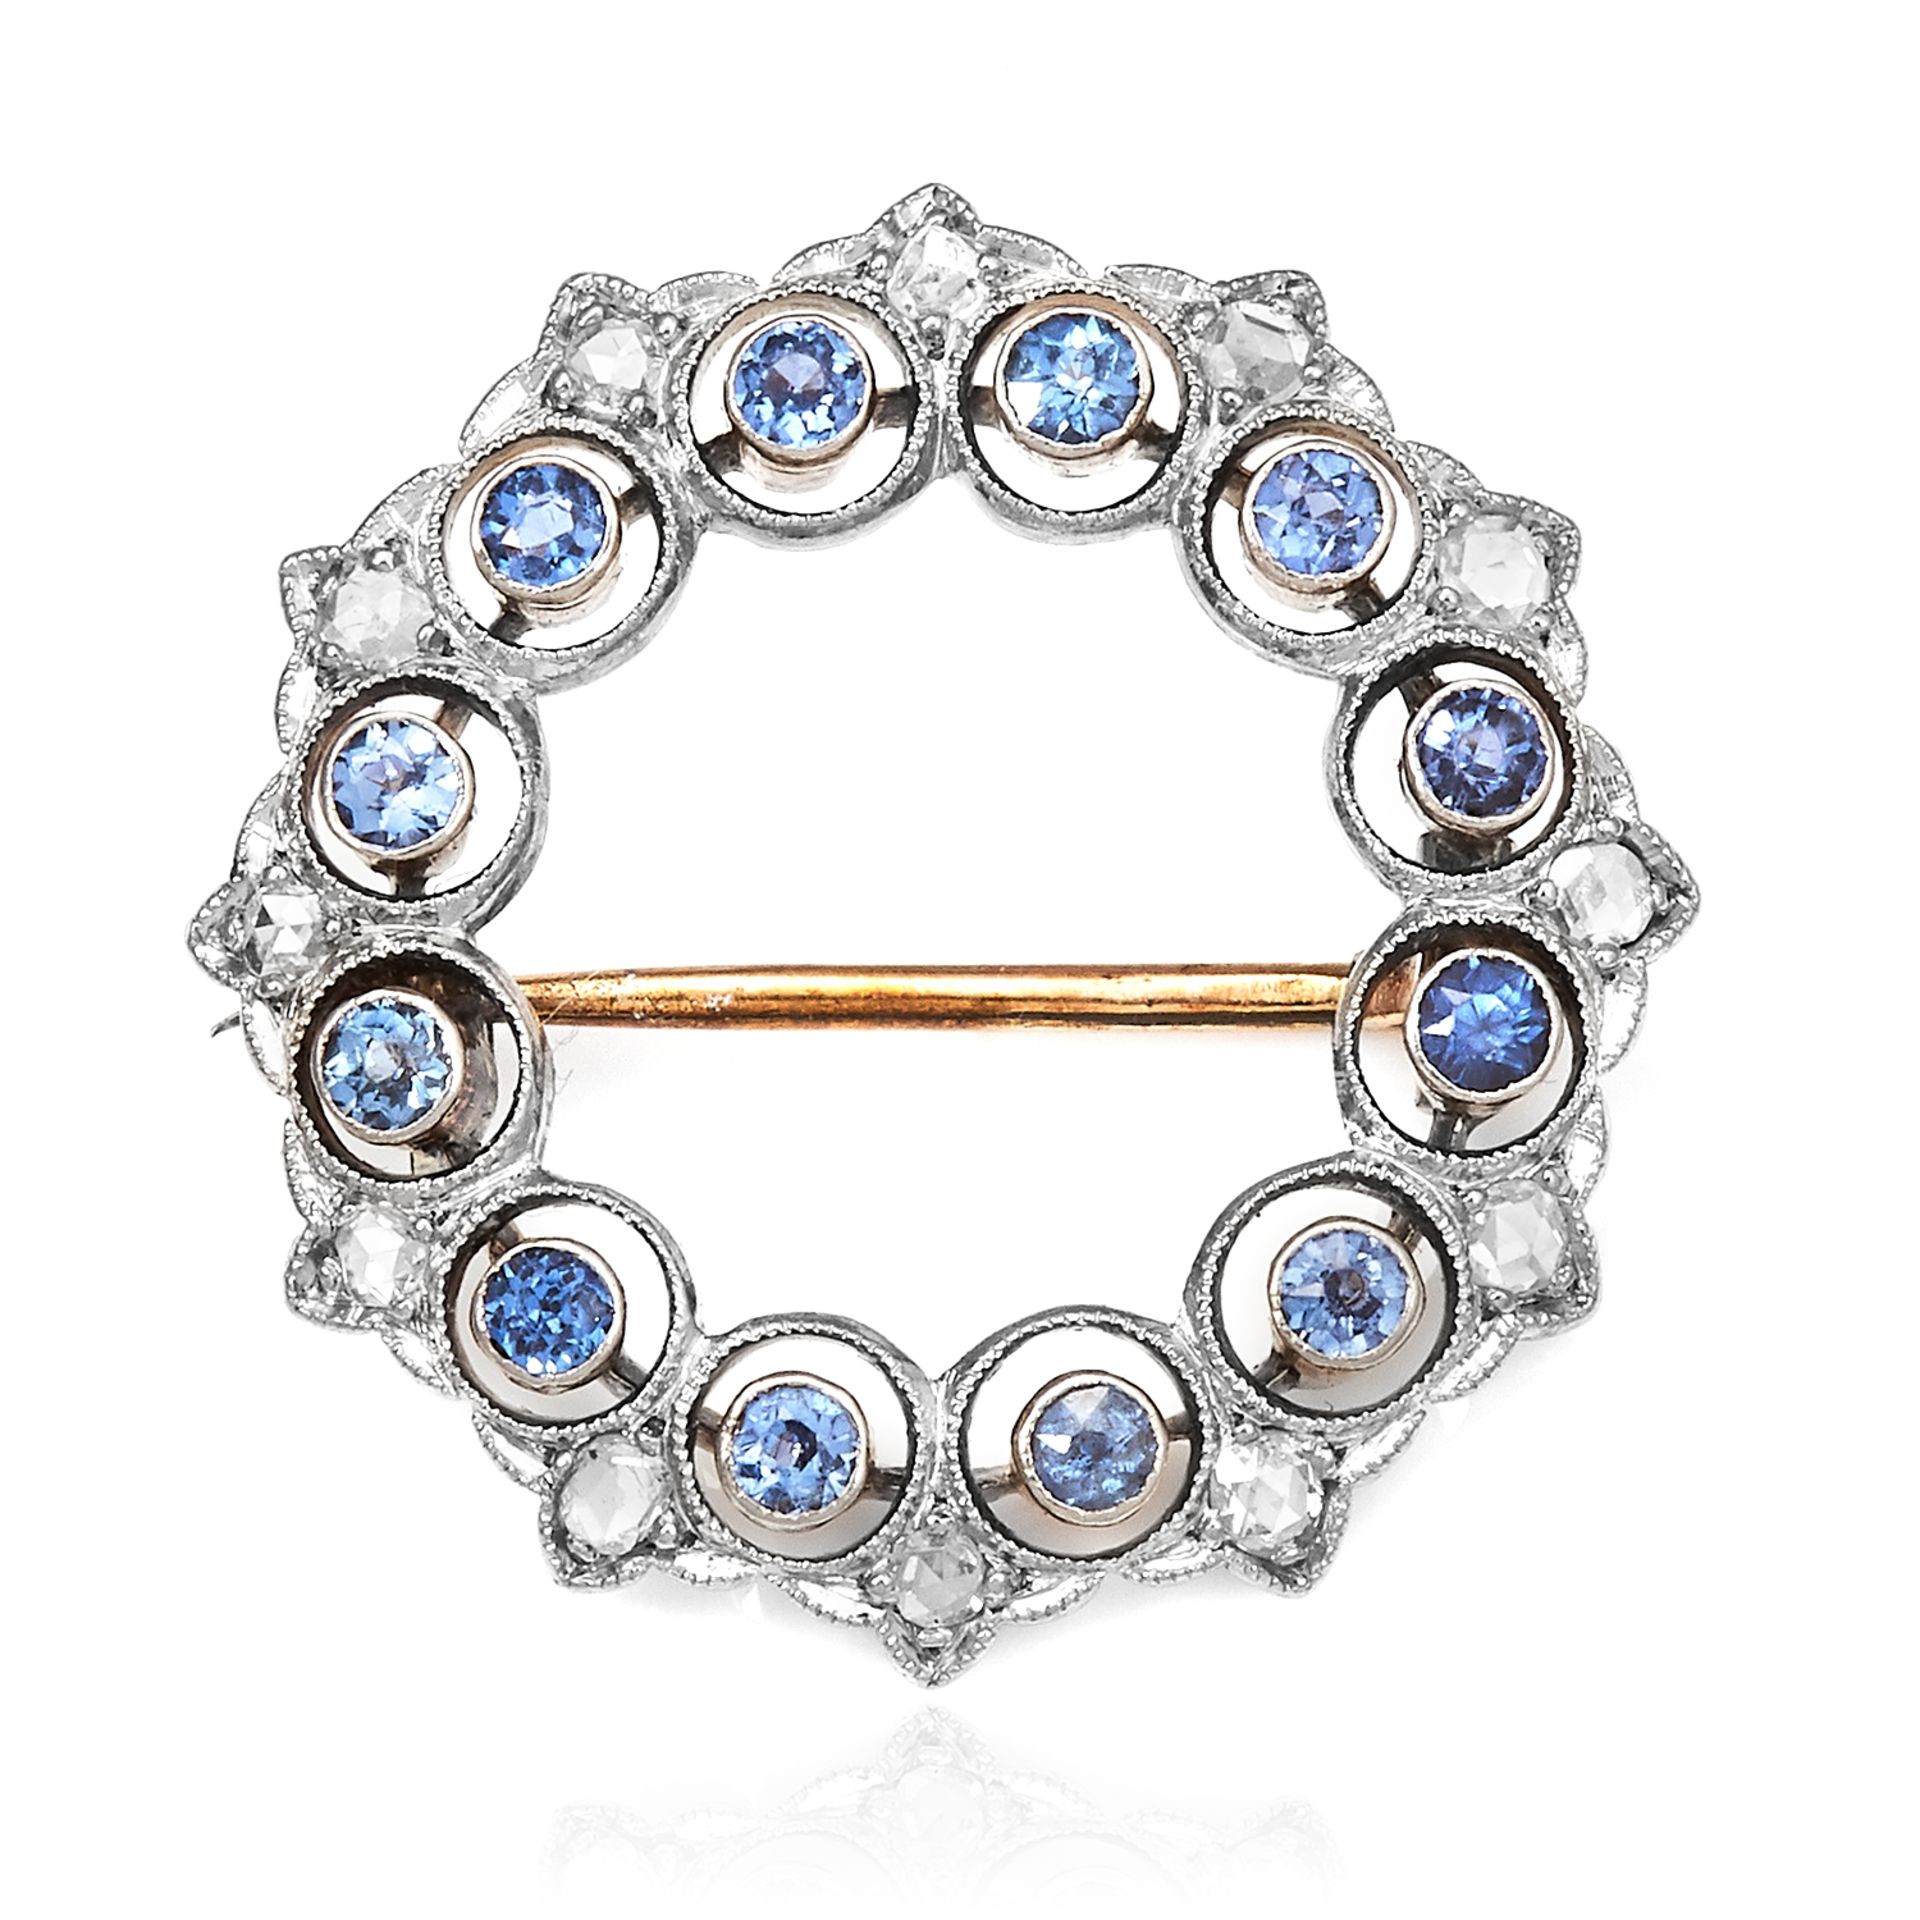 AN ANTIQUE SAPPHIRE AND DIAMOND BROOCH in yellow gold and platinum, the circular motif is jewelled